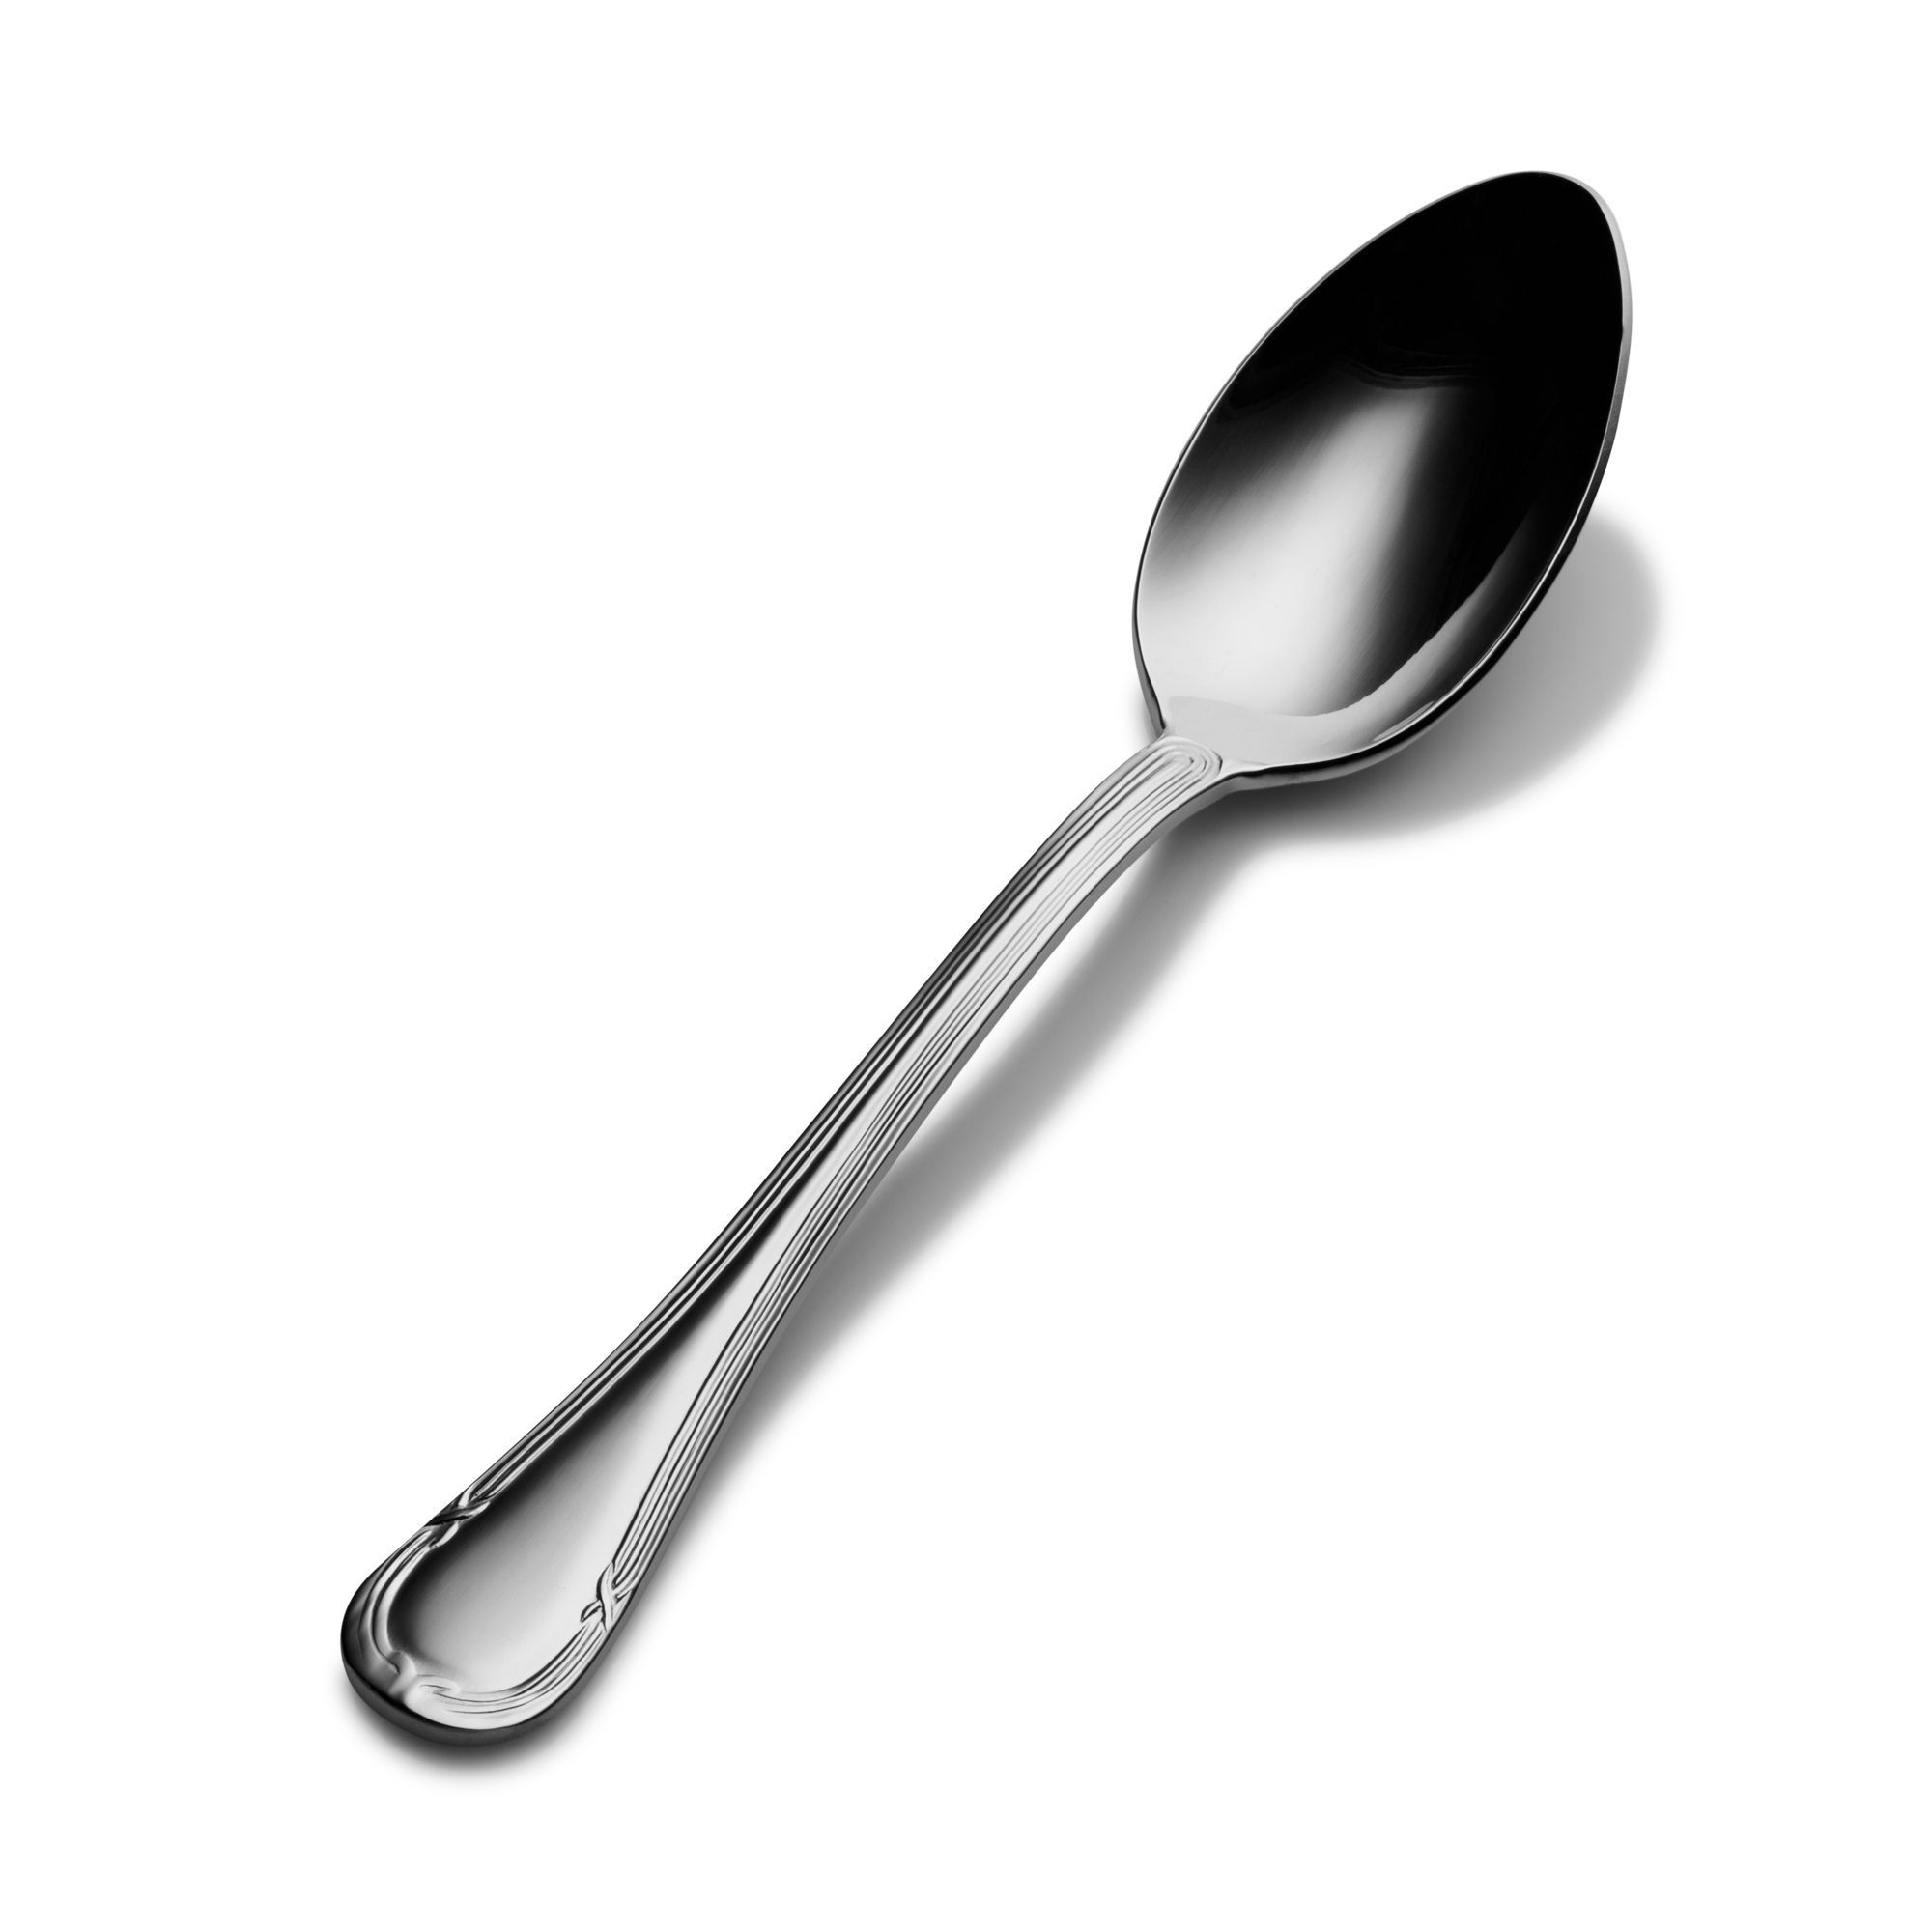 Bon Chef S803S Florence 18/8 Stainless Steel Silverplated Soup and Dessert Spoon